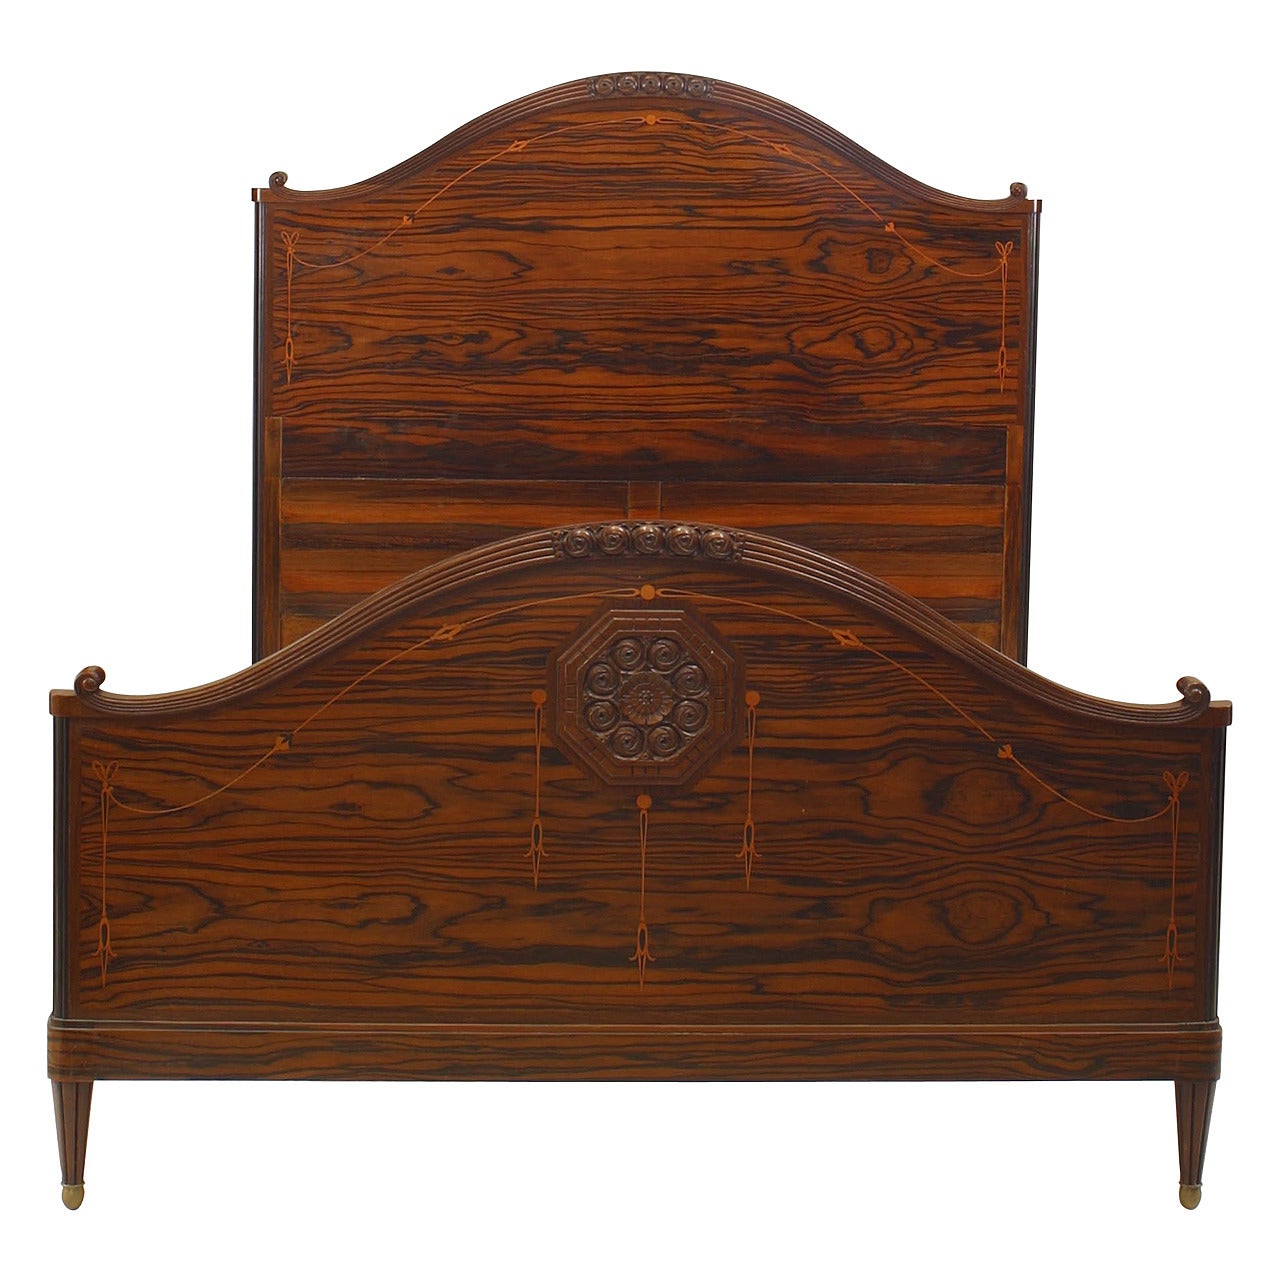 French Art Deco Marquetry Palisander and Amaranth Queen-Sized Bed